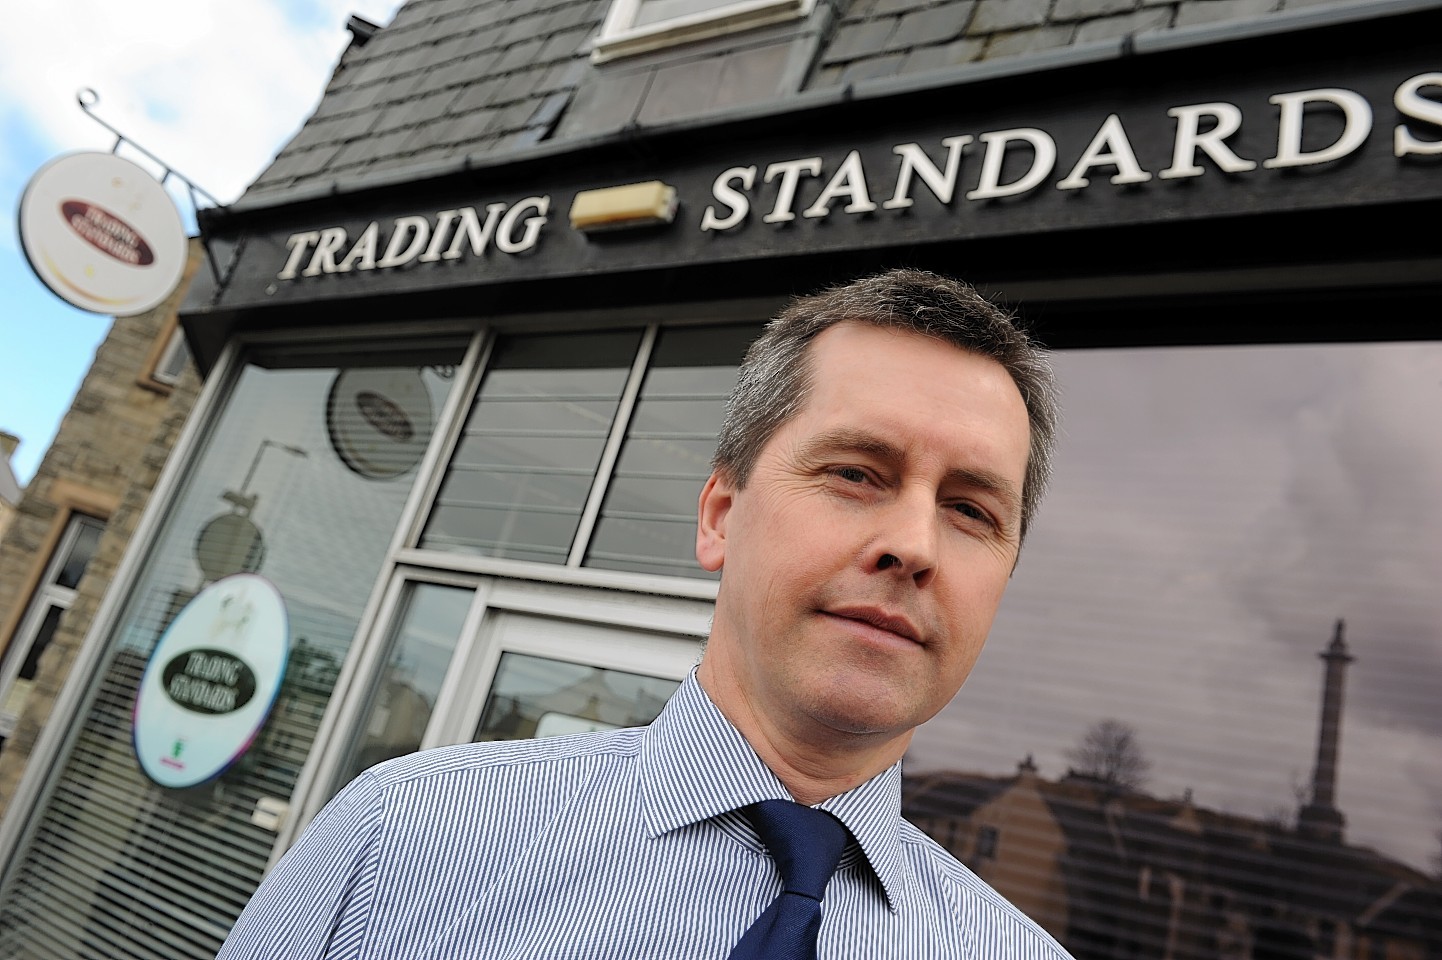 Moray Trading Standards manager Peter Adamson, outside his office in High Street, Elgin.